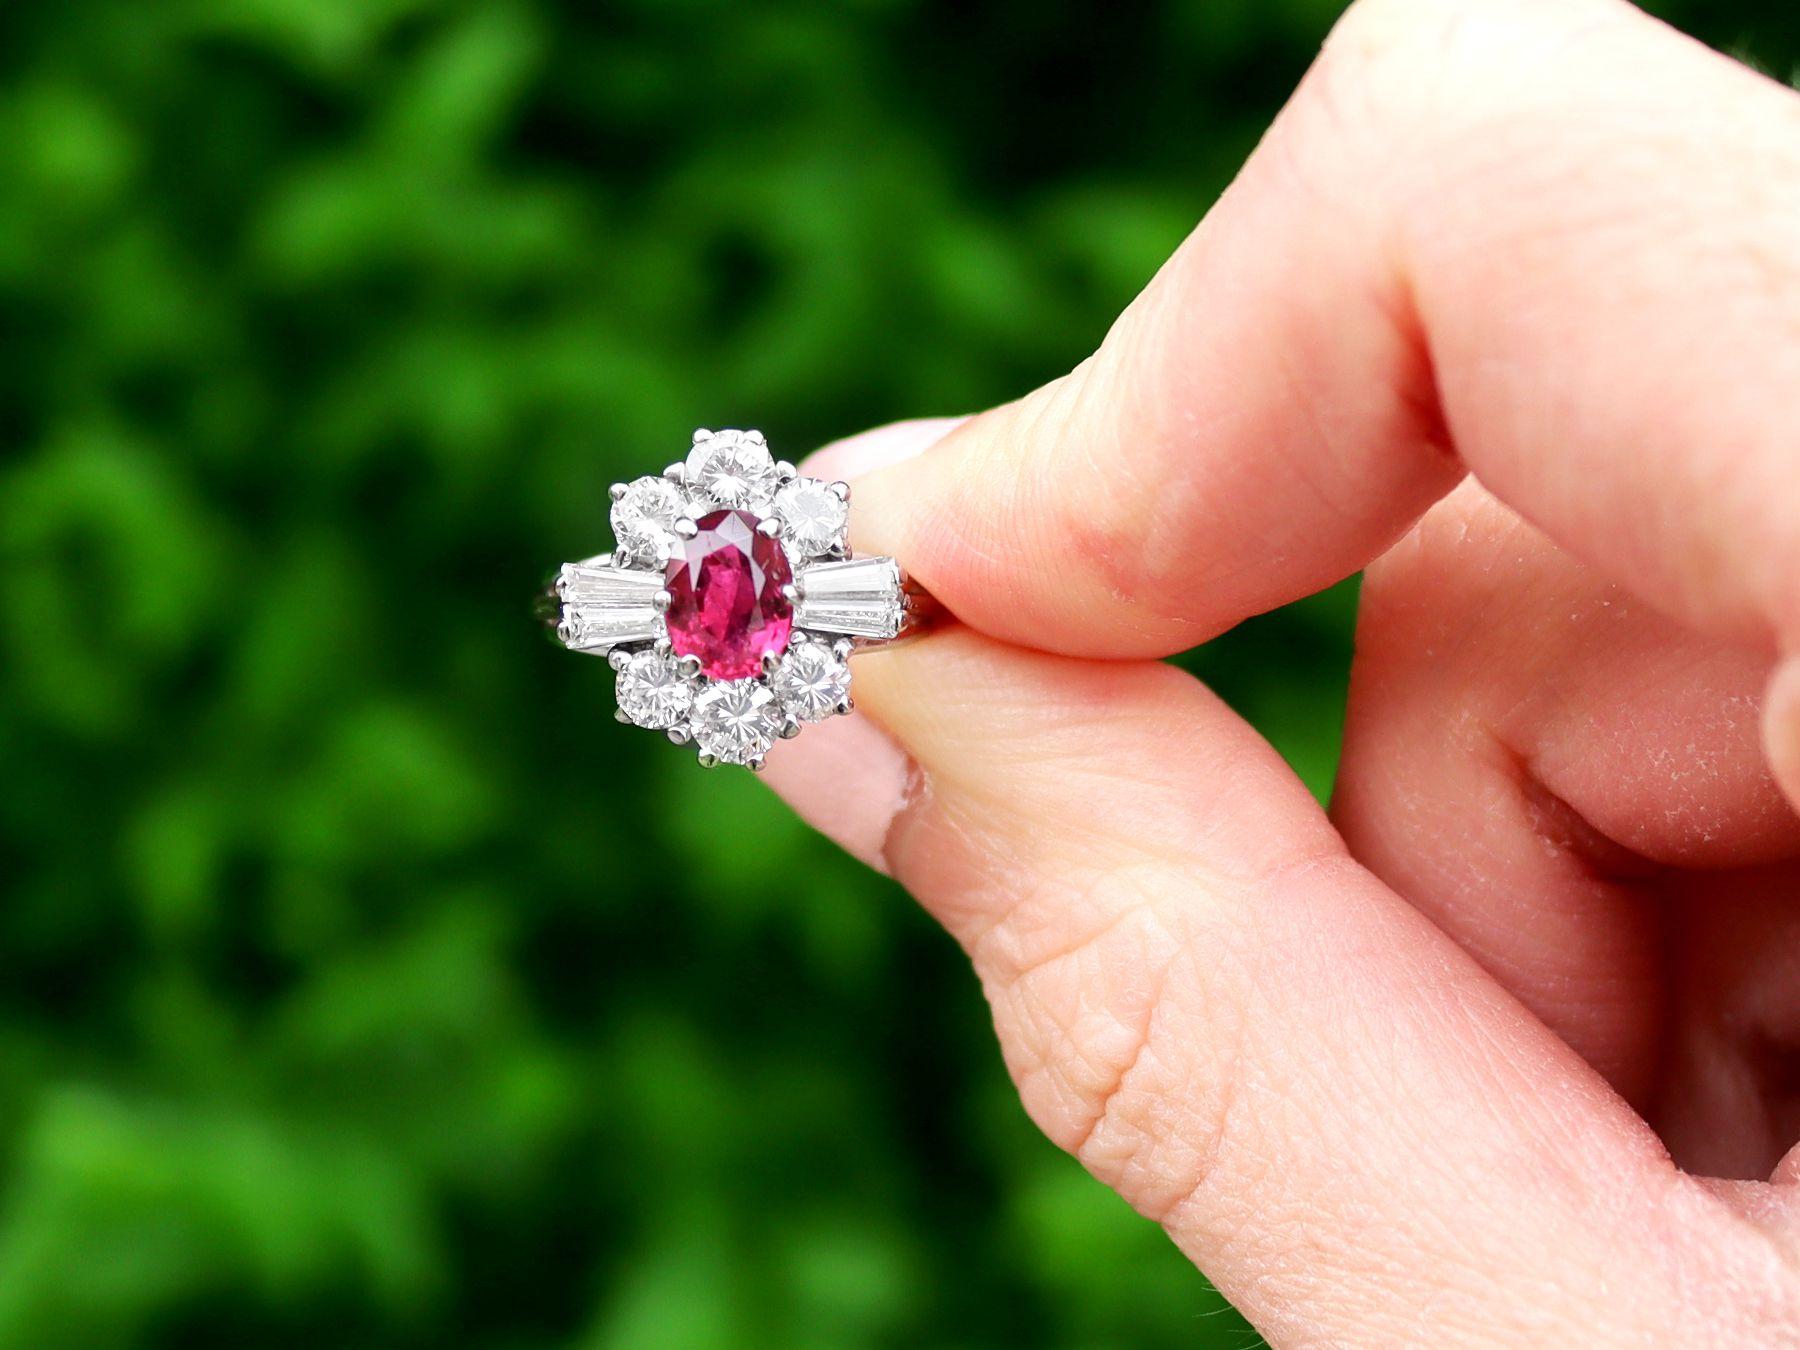 A stunning, fine and impressive vintage 1.18 carat ruby and 1.38 carat diamond, 18 karat white gold cluster ring; part of our vintage jewelry and estate jewelry collections

This stunning, fine and impressive vintage ruby cluster ring has been